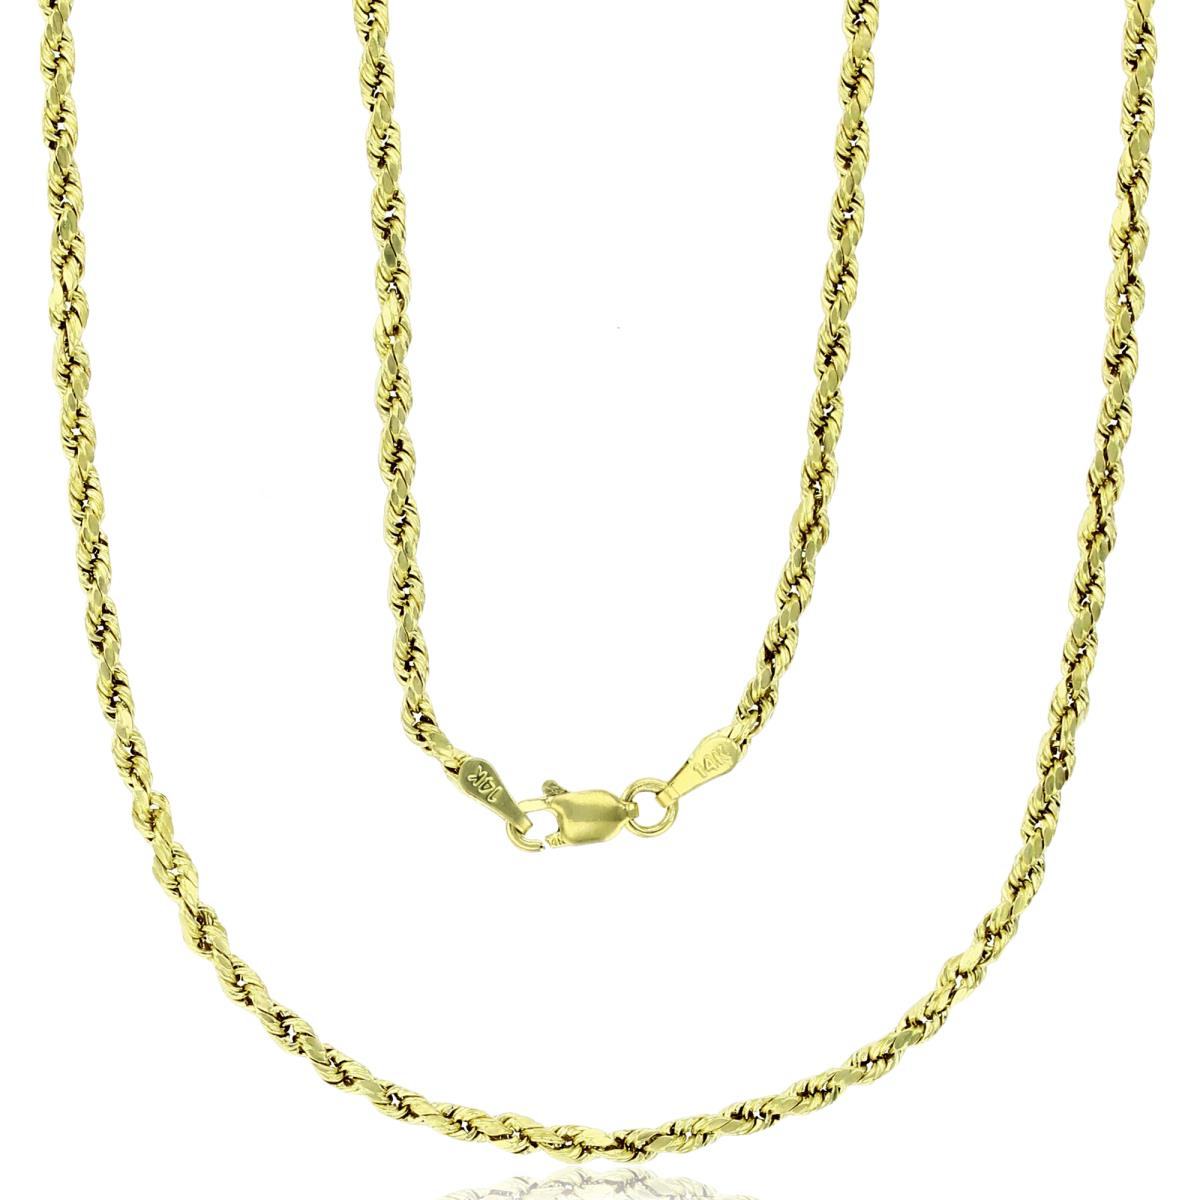 10k Yellow Gold 2mm DC Hollow Rope 018 7.25" Chain Bracelet